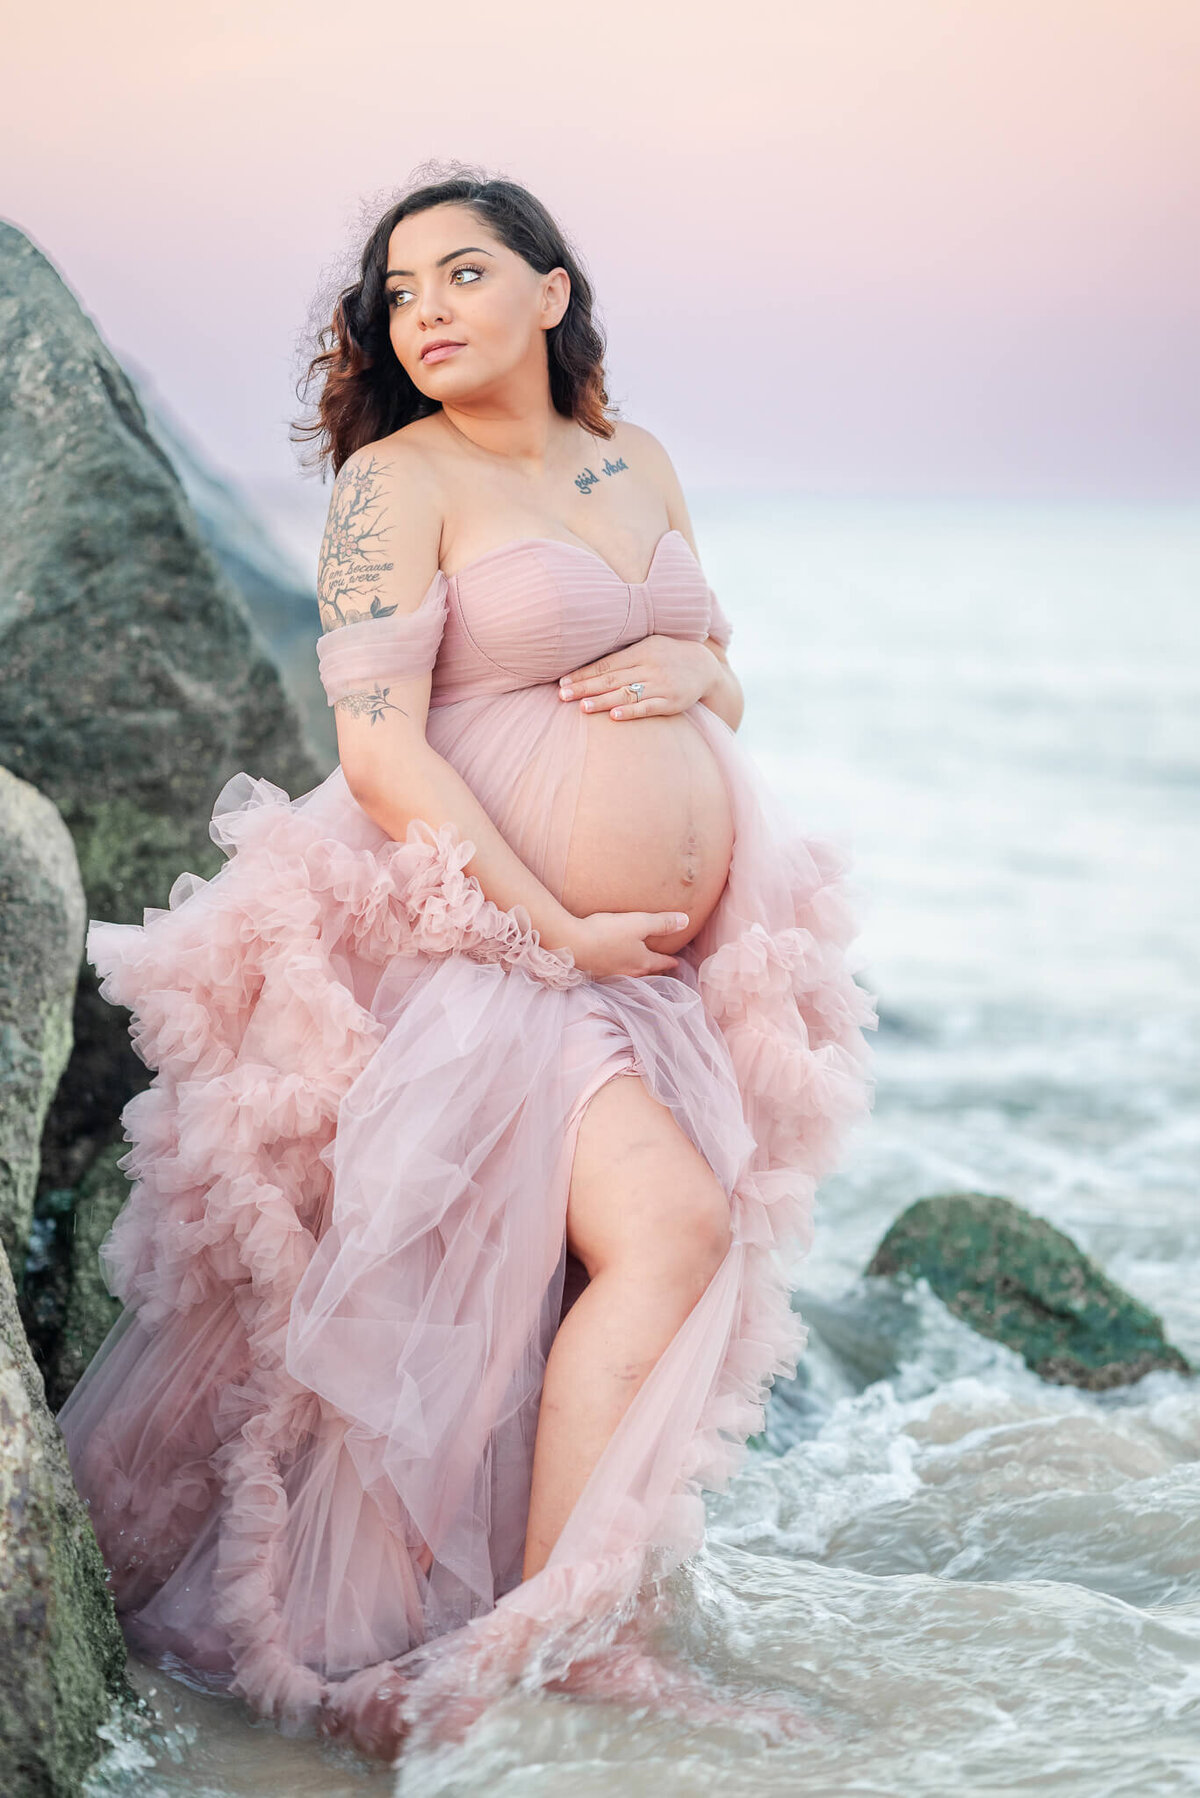 A pregnant woman wearing a pink tulle dress cradles her belly while standing in the waves at the beach.